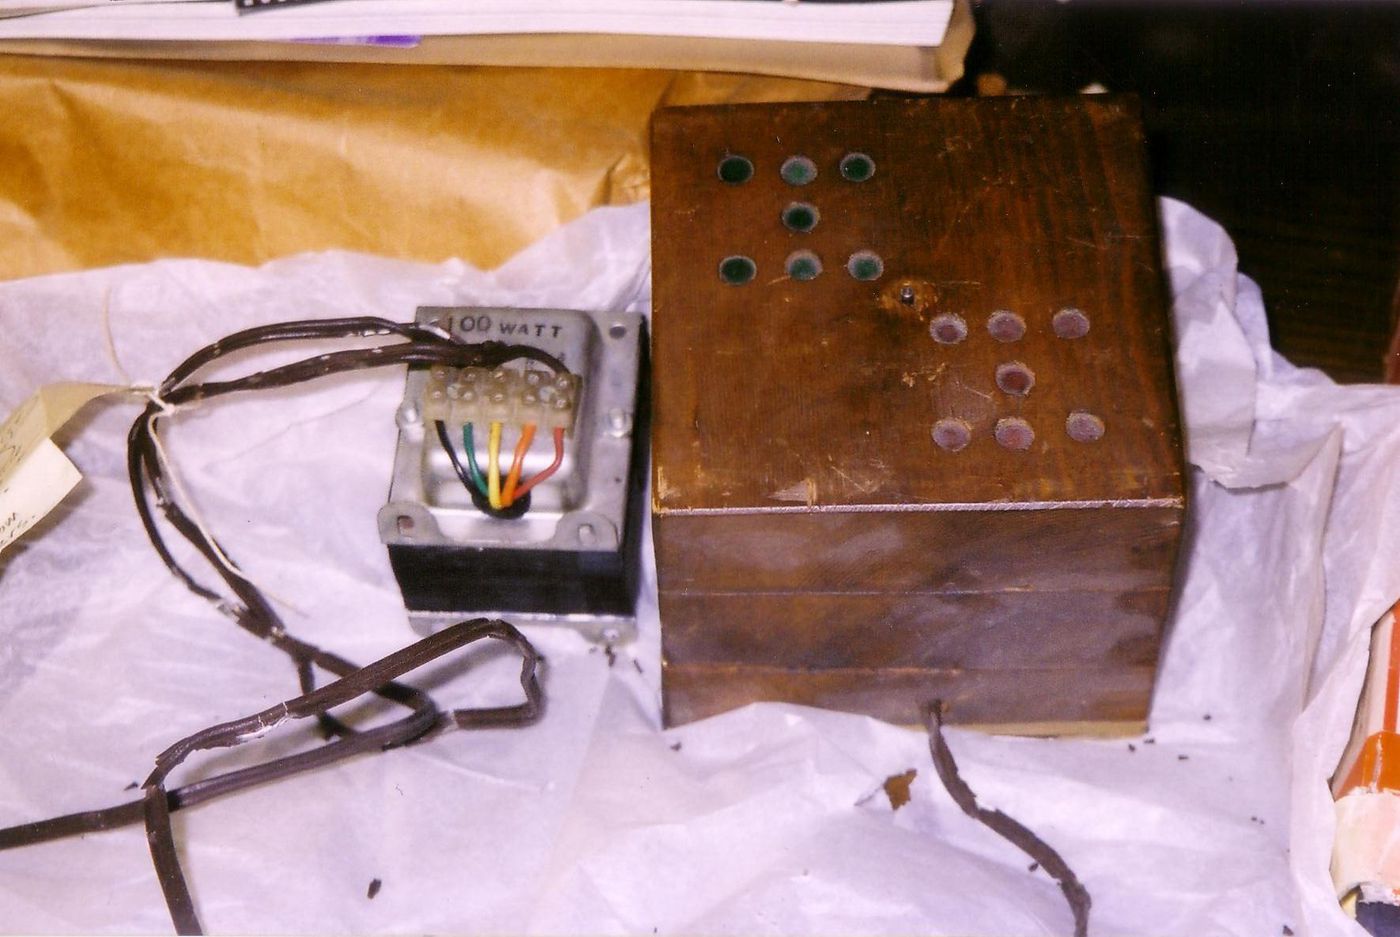 Random Machine, including its 3 component parts one of which is encased in a CCA-constructed box